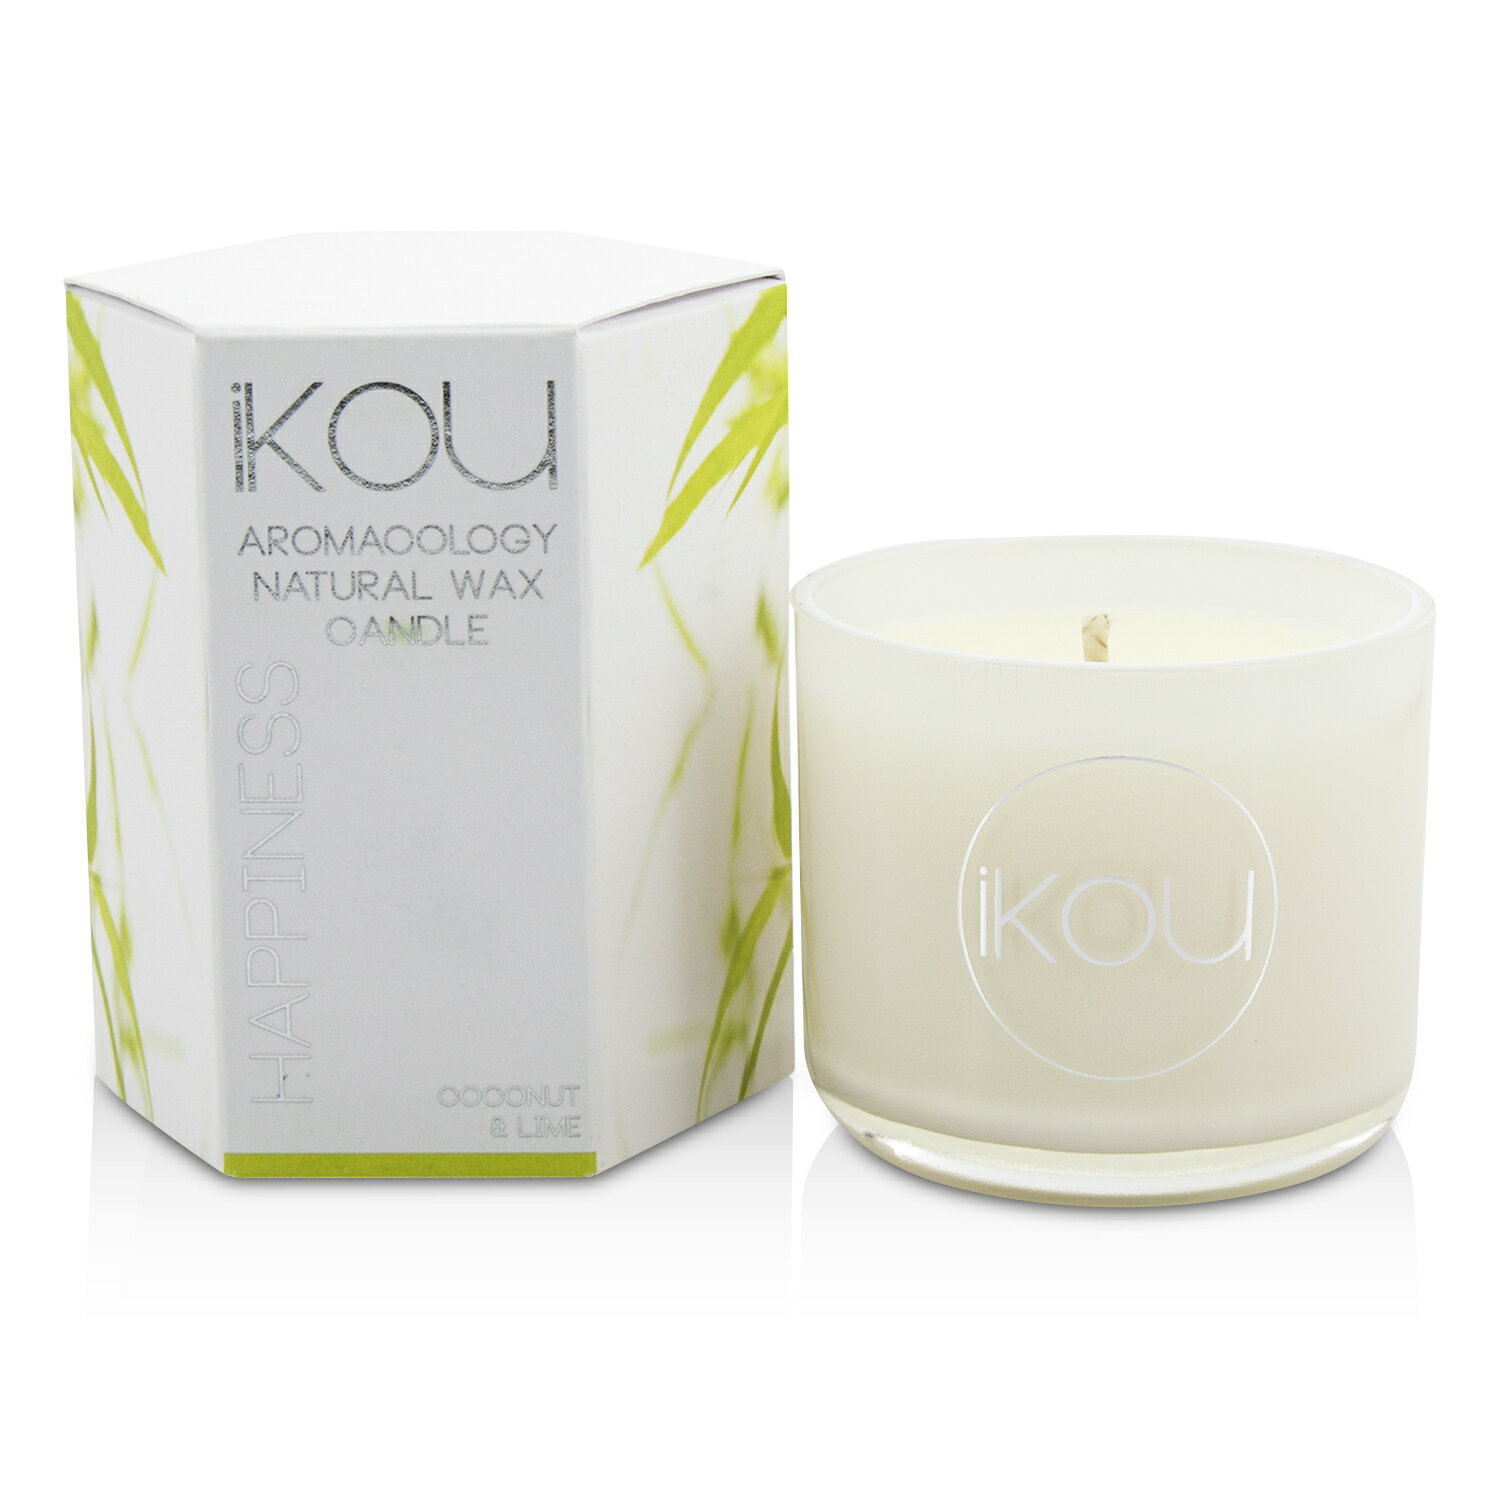 iKOU - Aromacology天然蠟蠟燭 -幸福 (椰子和青檸)Eco-Luxury Aromacology Natural Wax Candle Glass - Happiness (Coconut & Lime)